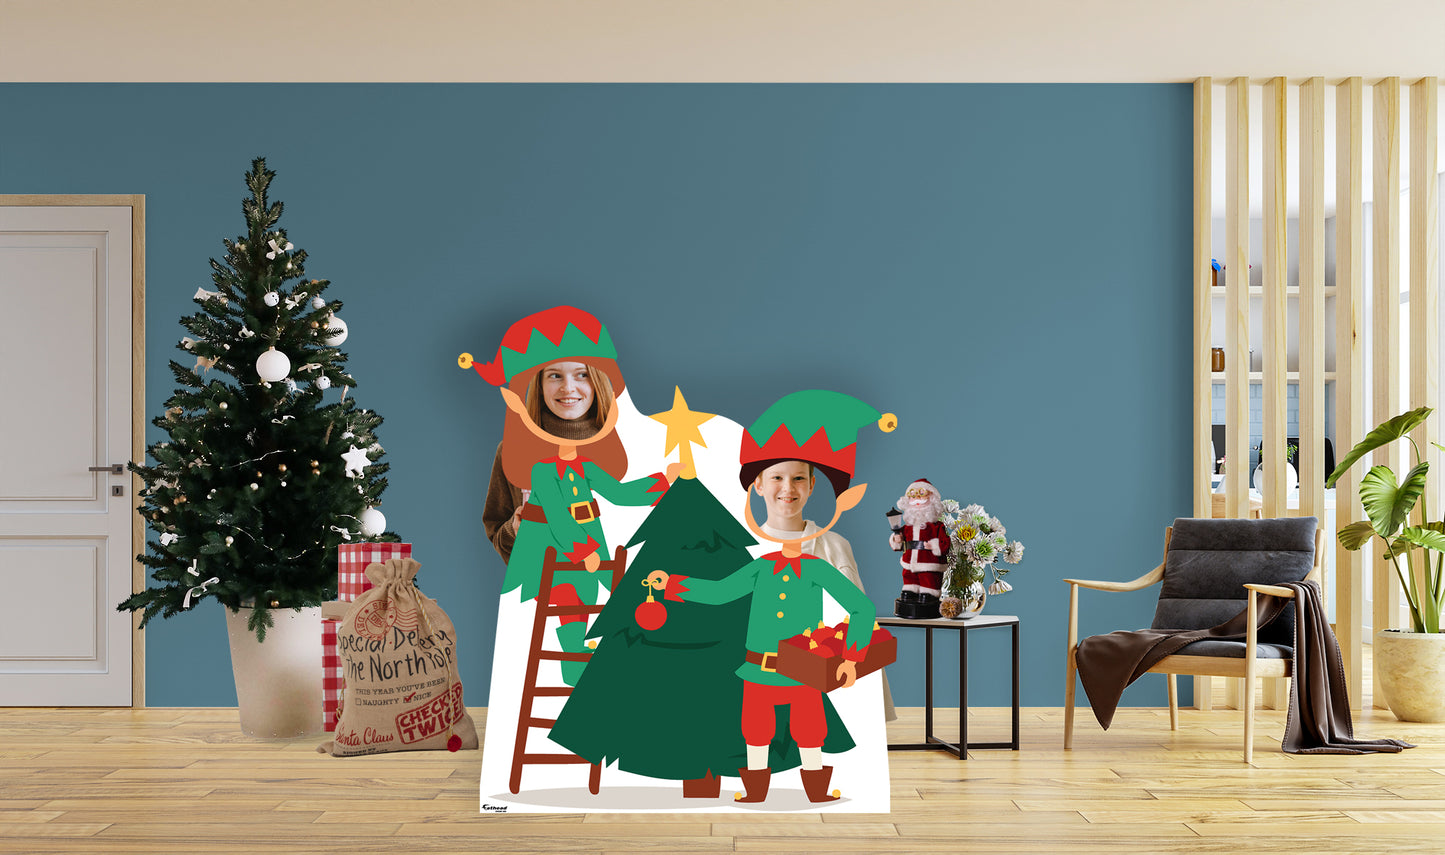 Christmas: Decorating The Christmas Tree Life-Size Cutout - Stand Out 44W x 51H